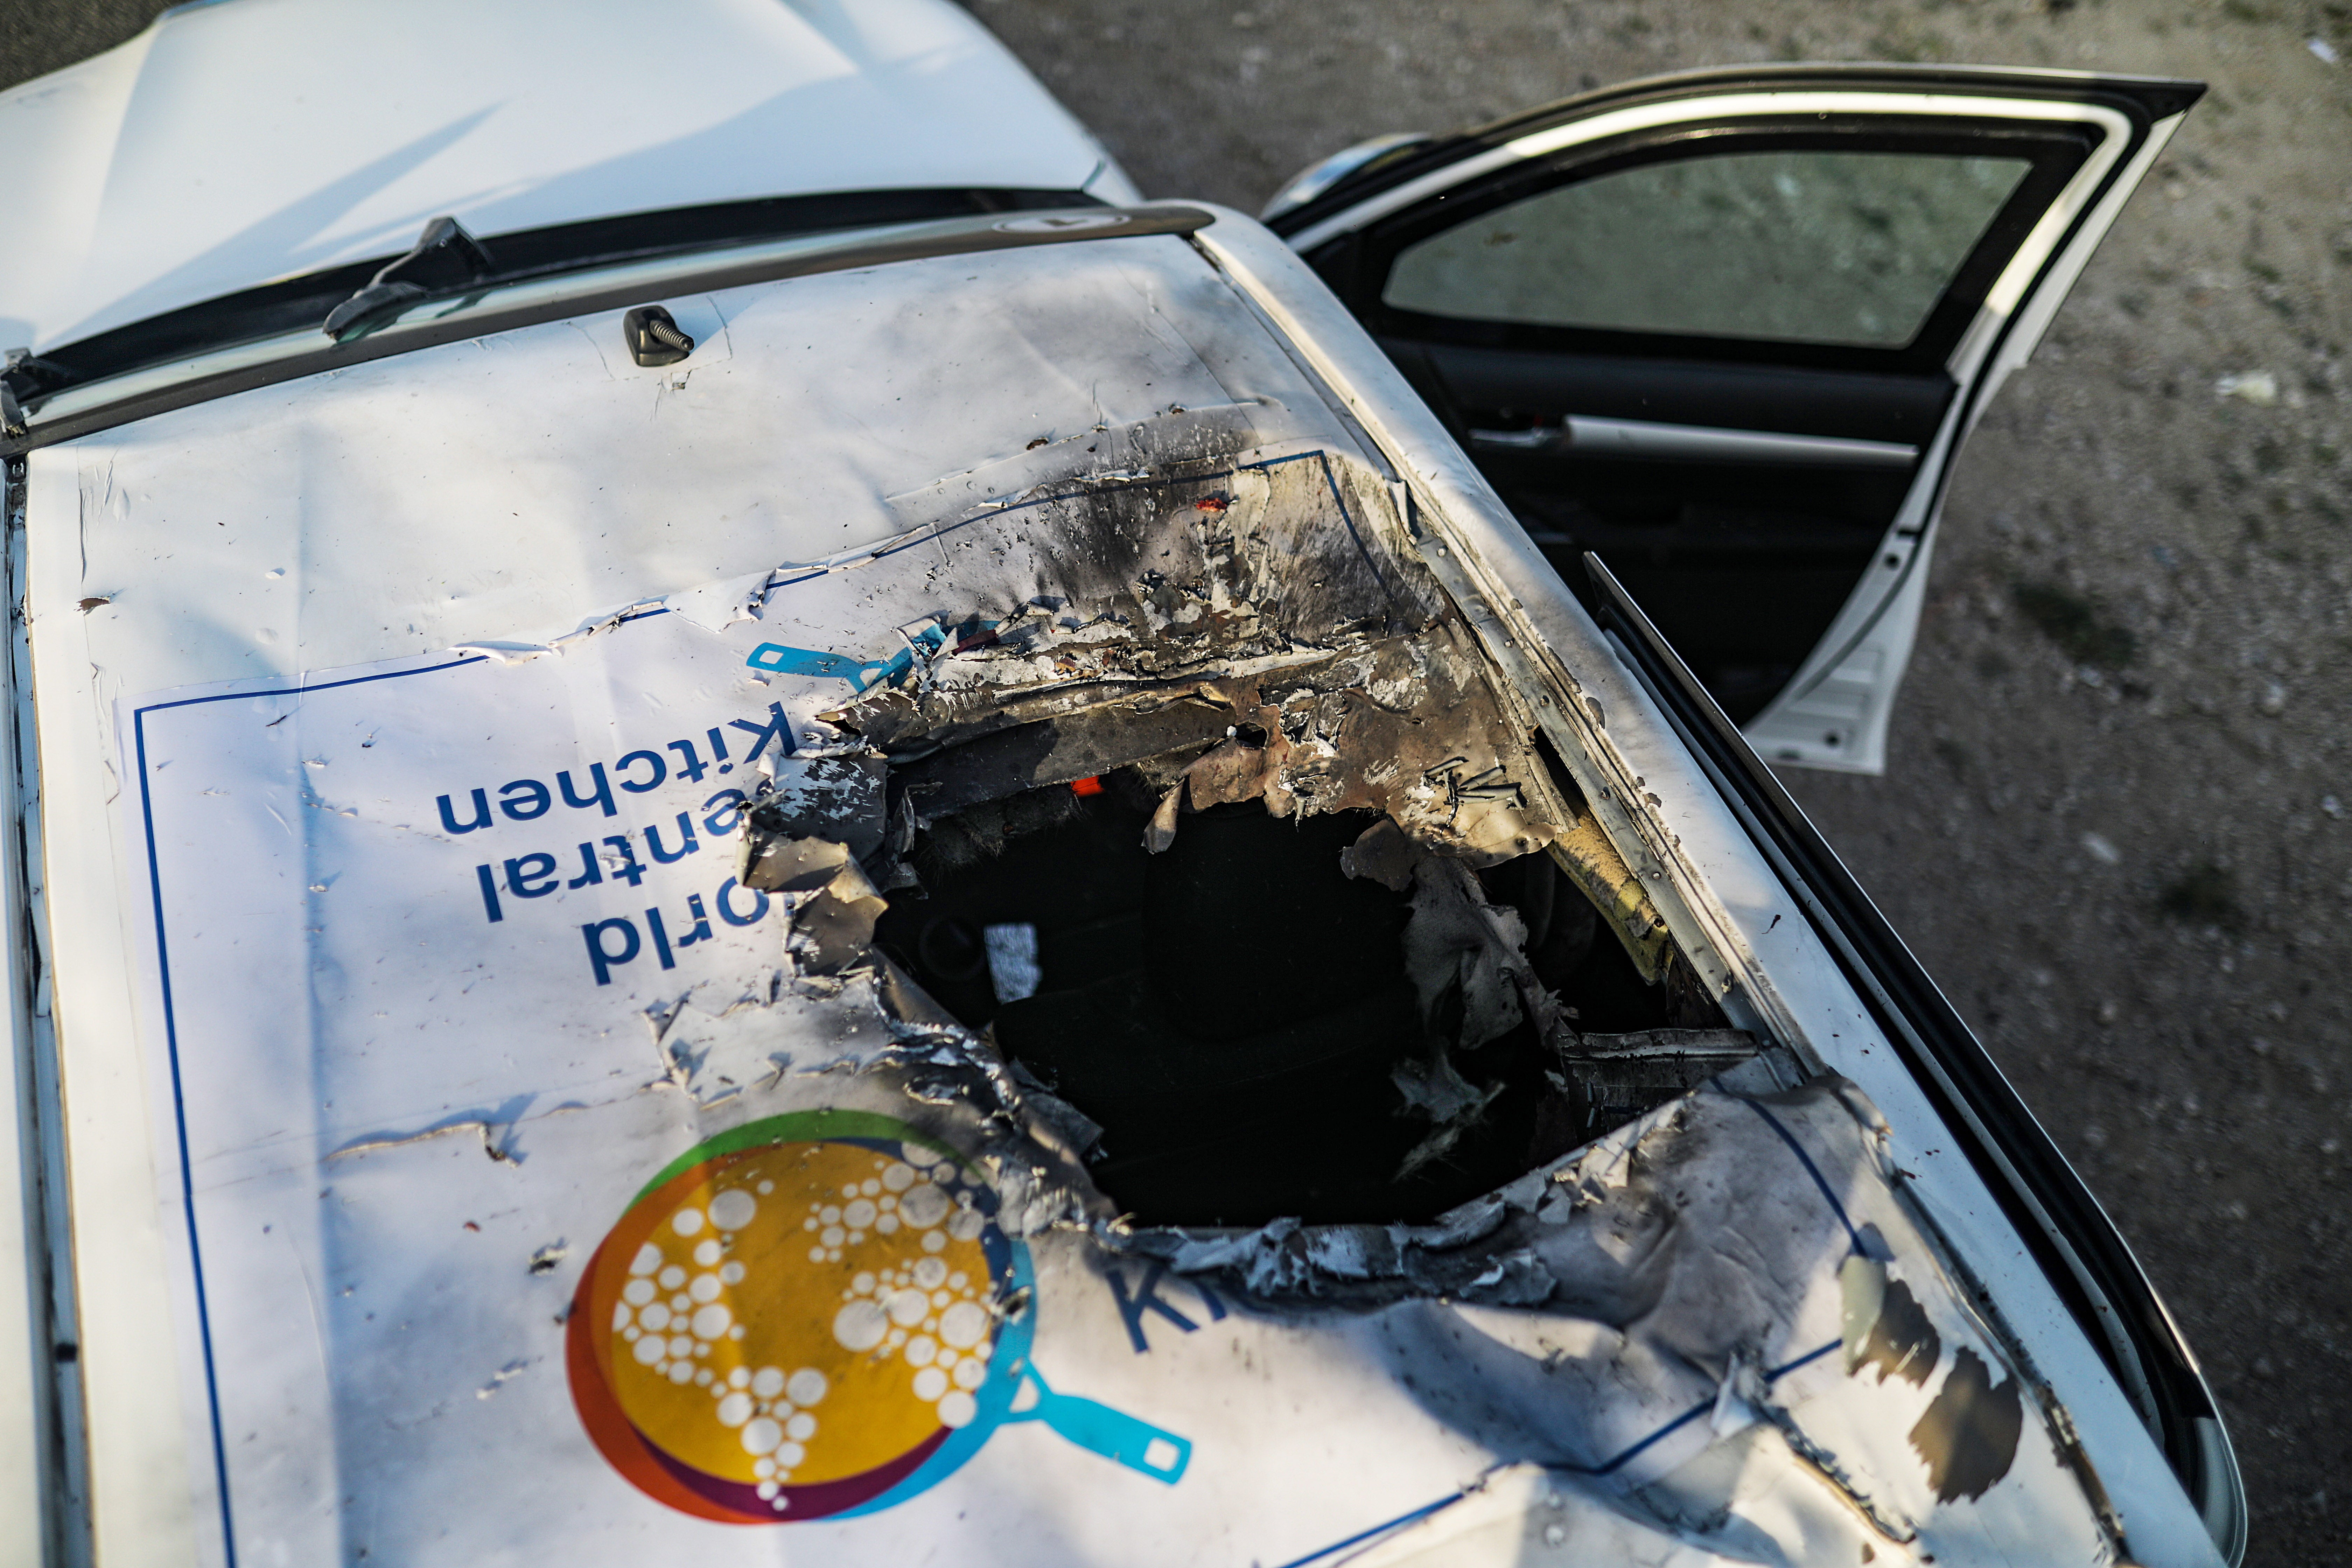 A WCK vehicle hit by an Israeli missile in the attack